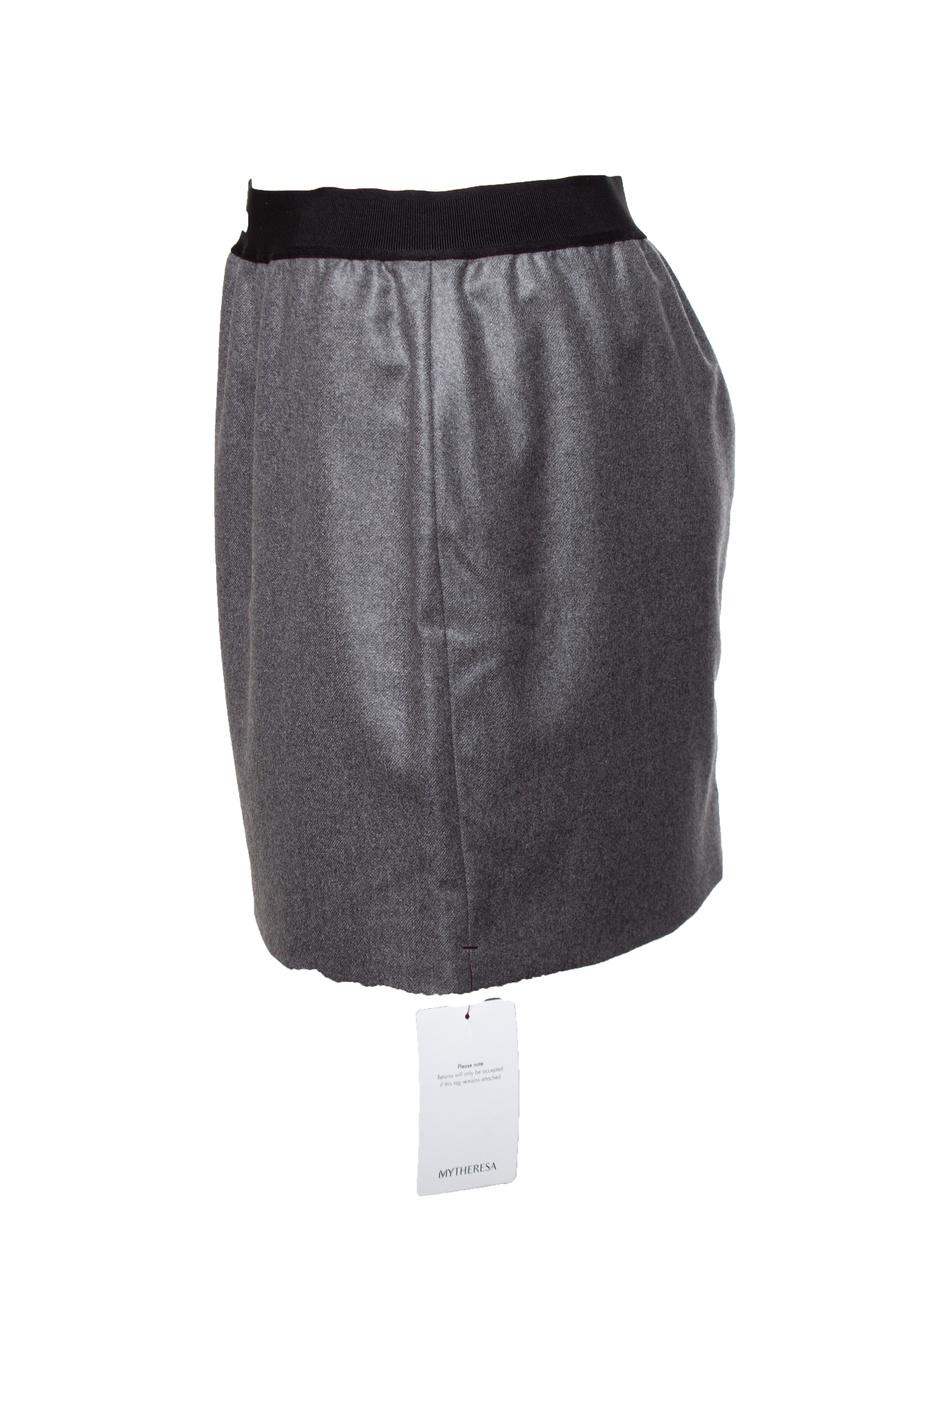 Women's Tom ford, Signature skirt in cashmere For Sale